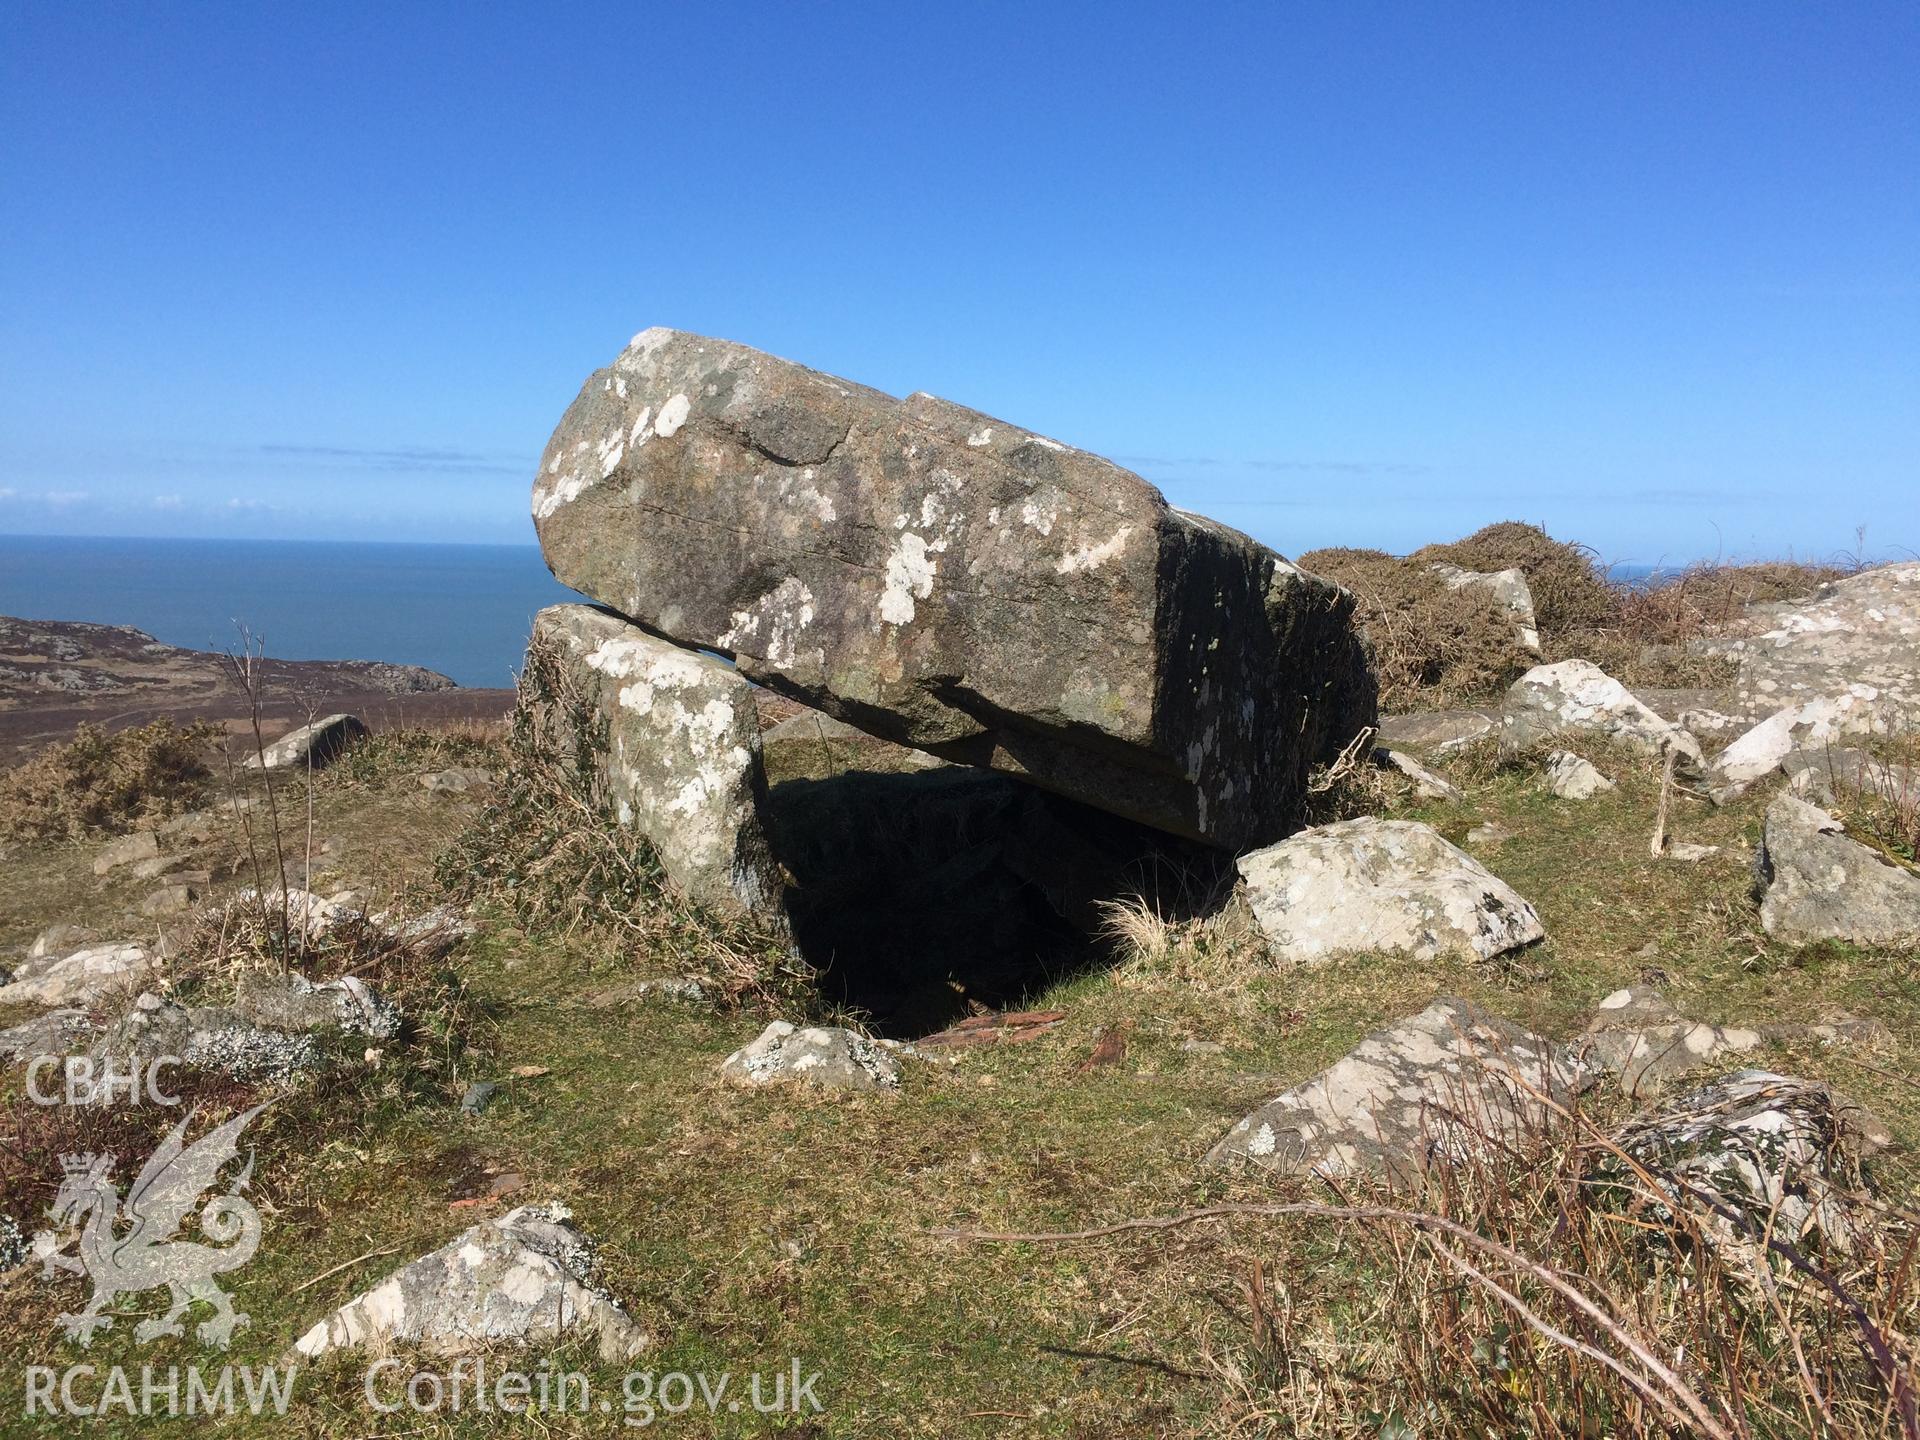 Colour photo showing view of Carn Llidi Burial Chambers, taken by Paul R. Davis, 2018.